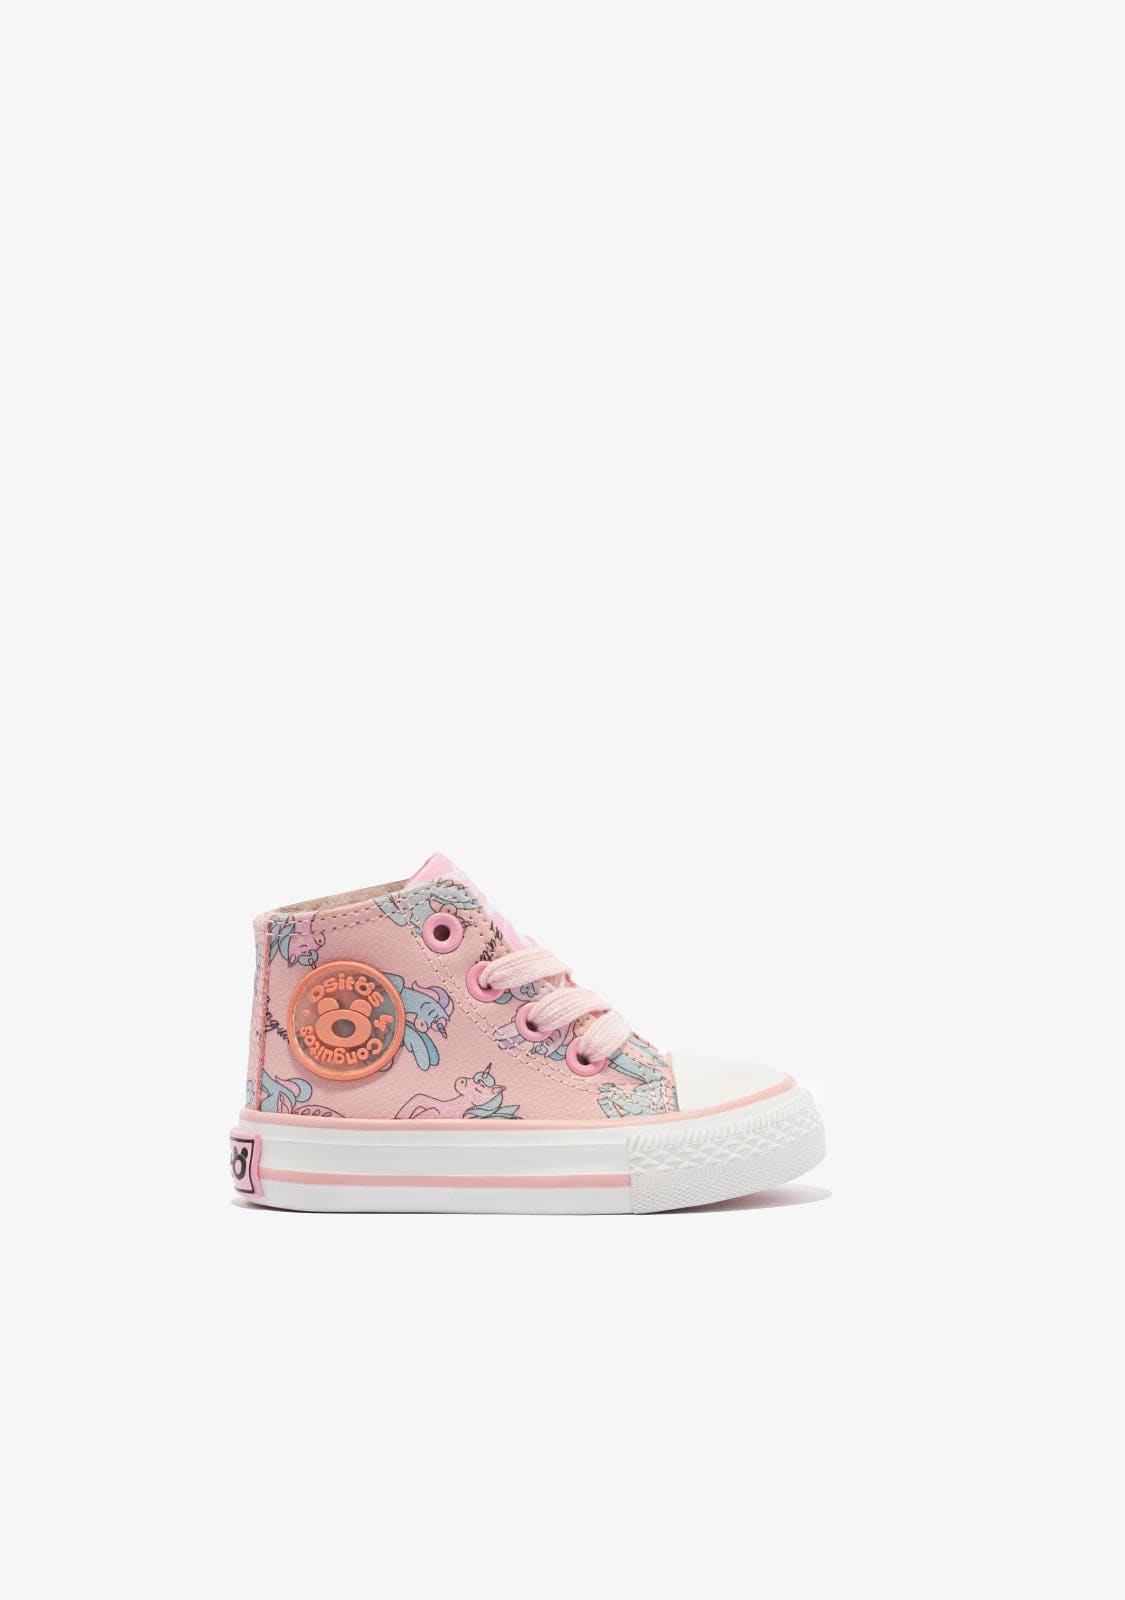 OSITO Shoes Baby's Pink Unicorn Hi-Top Sneakers Napa